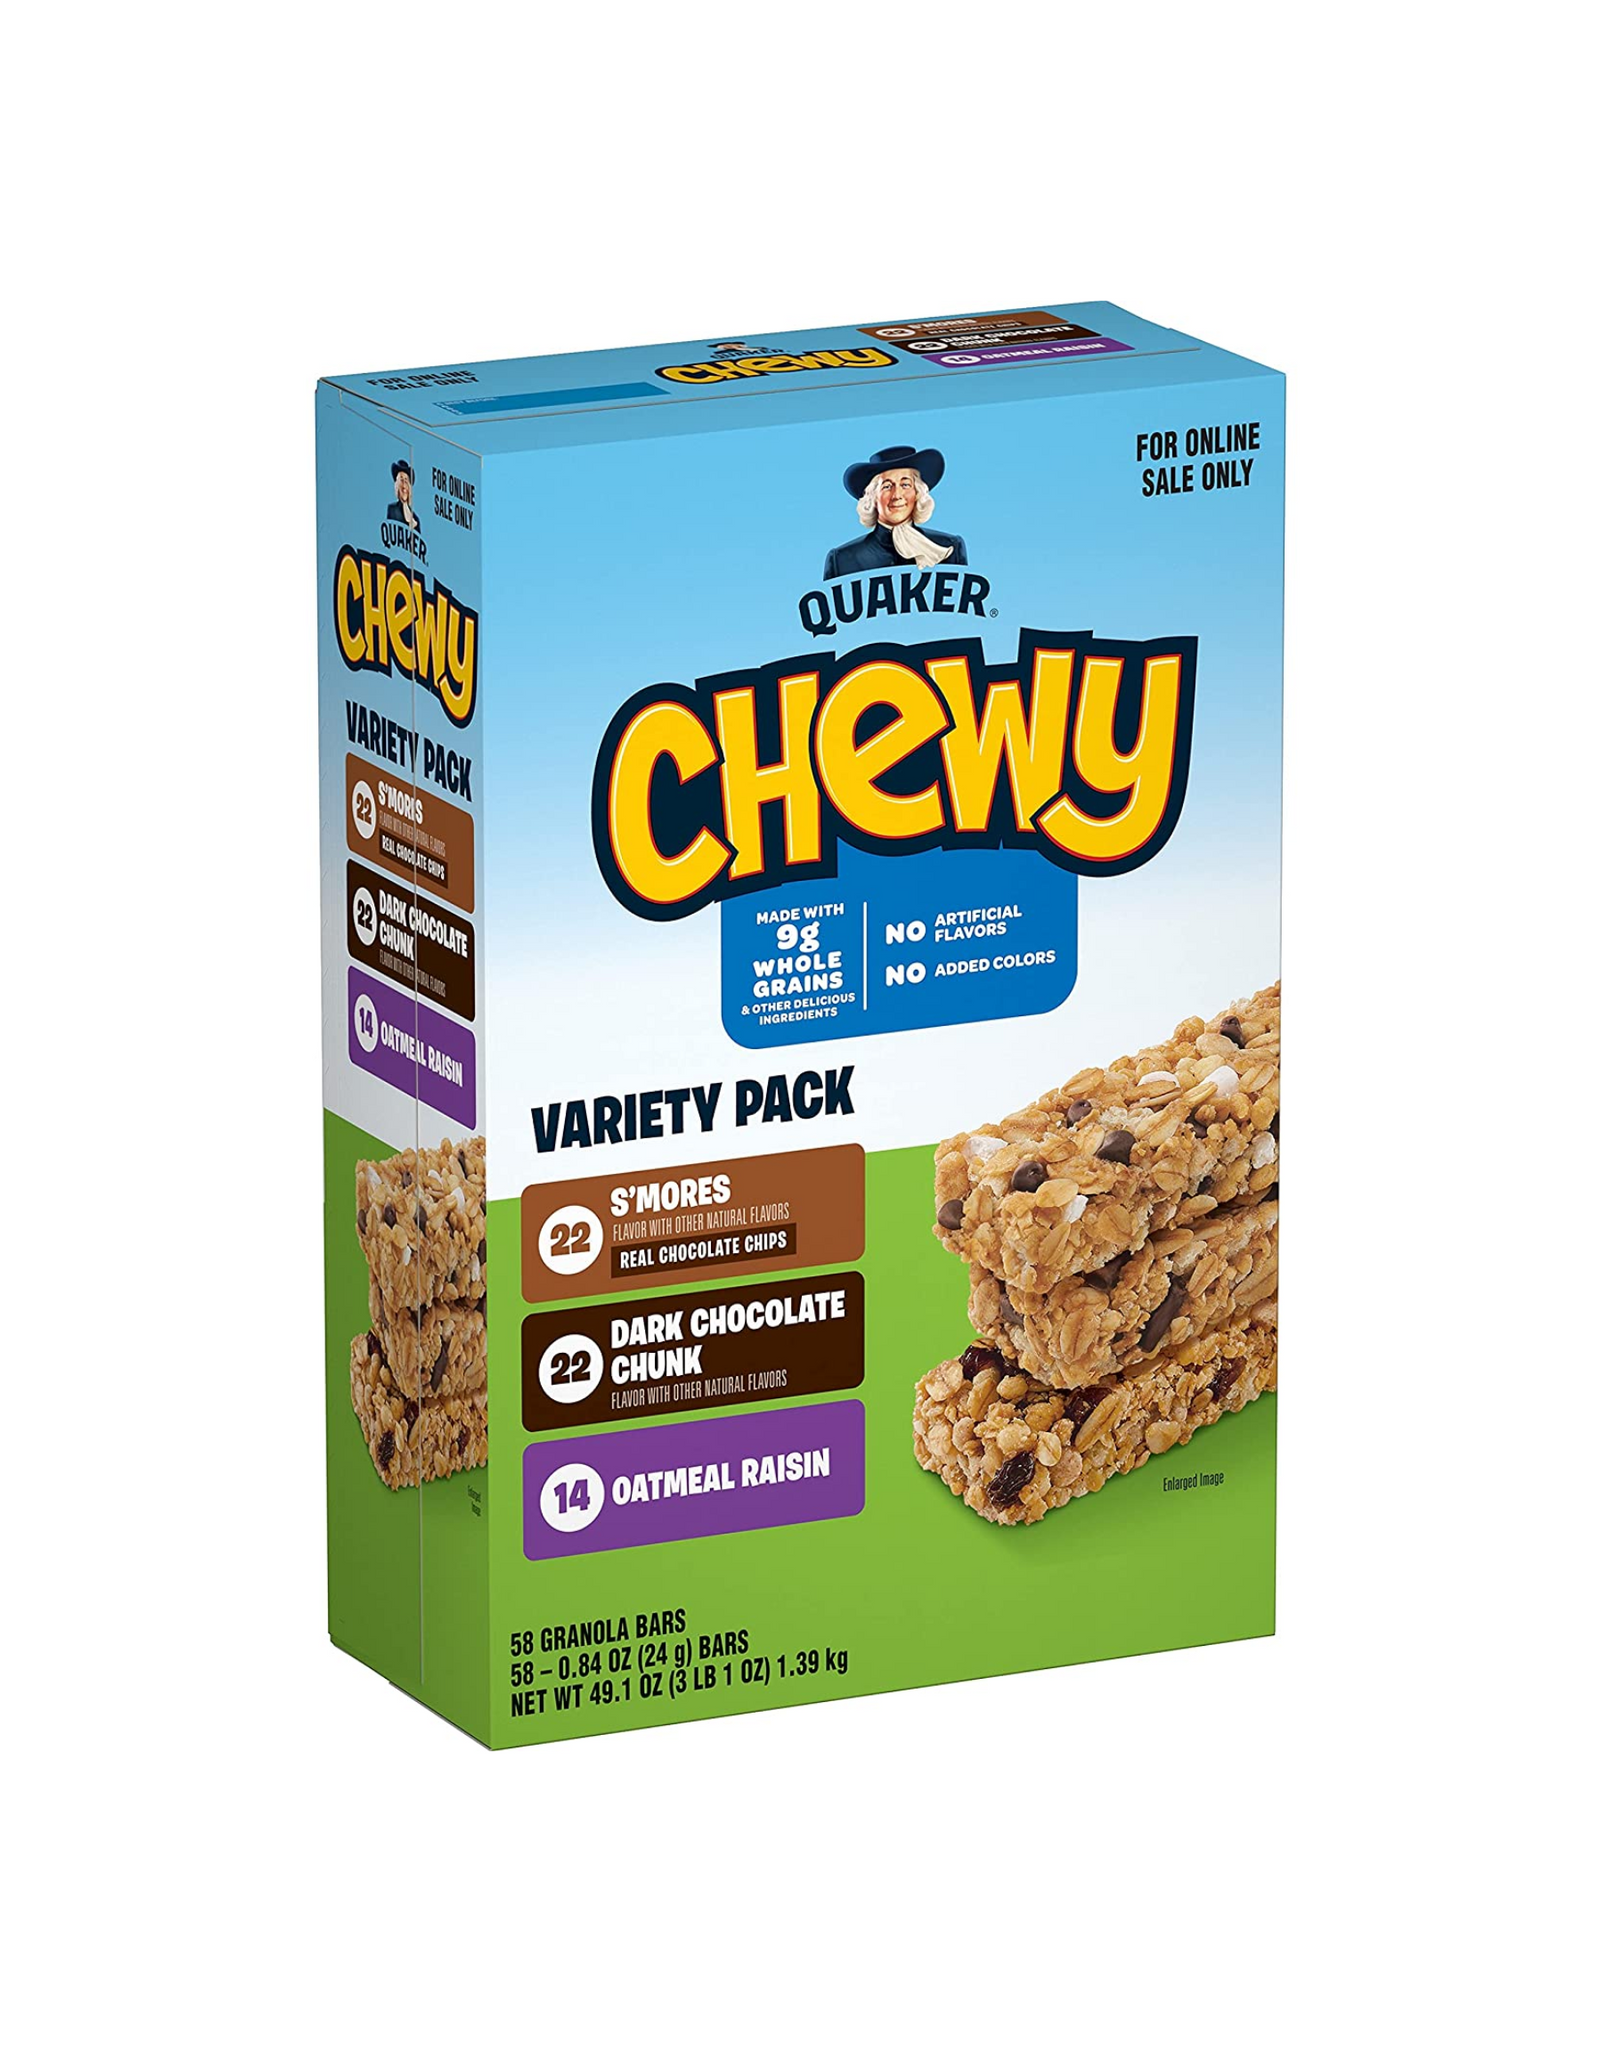 Quaker Chewy Granola Bars, 3 Flavor Back to School Variety Pack, 49.1 oz in Total (58 Bars)